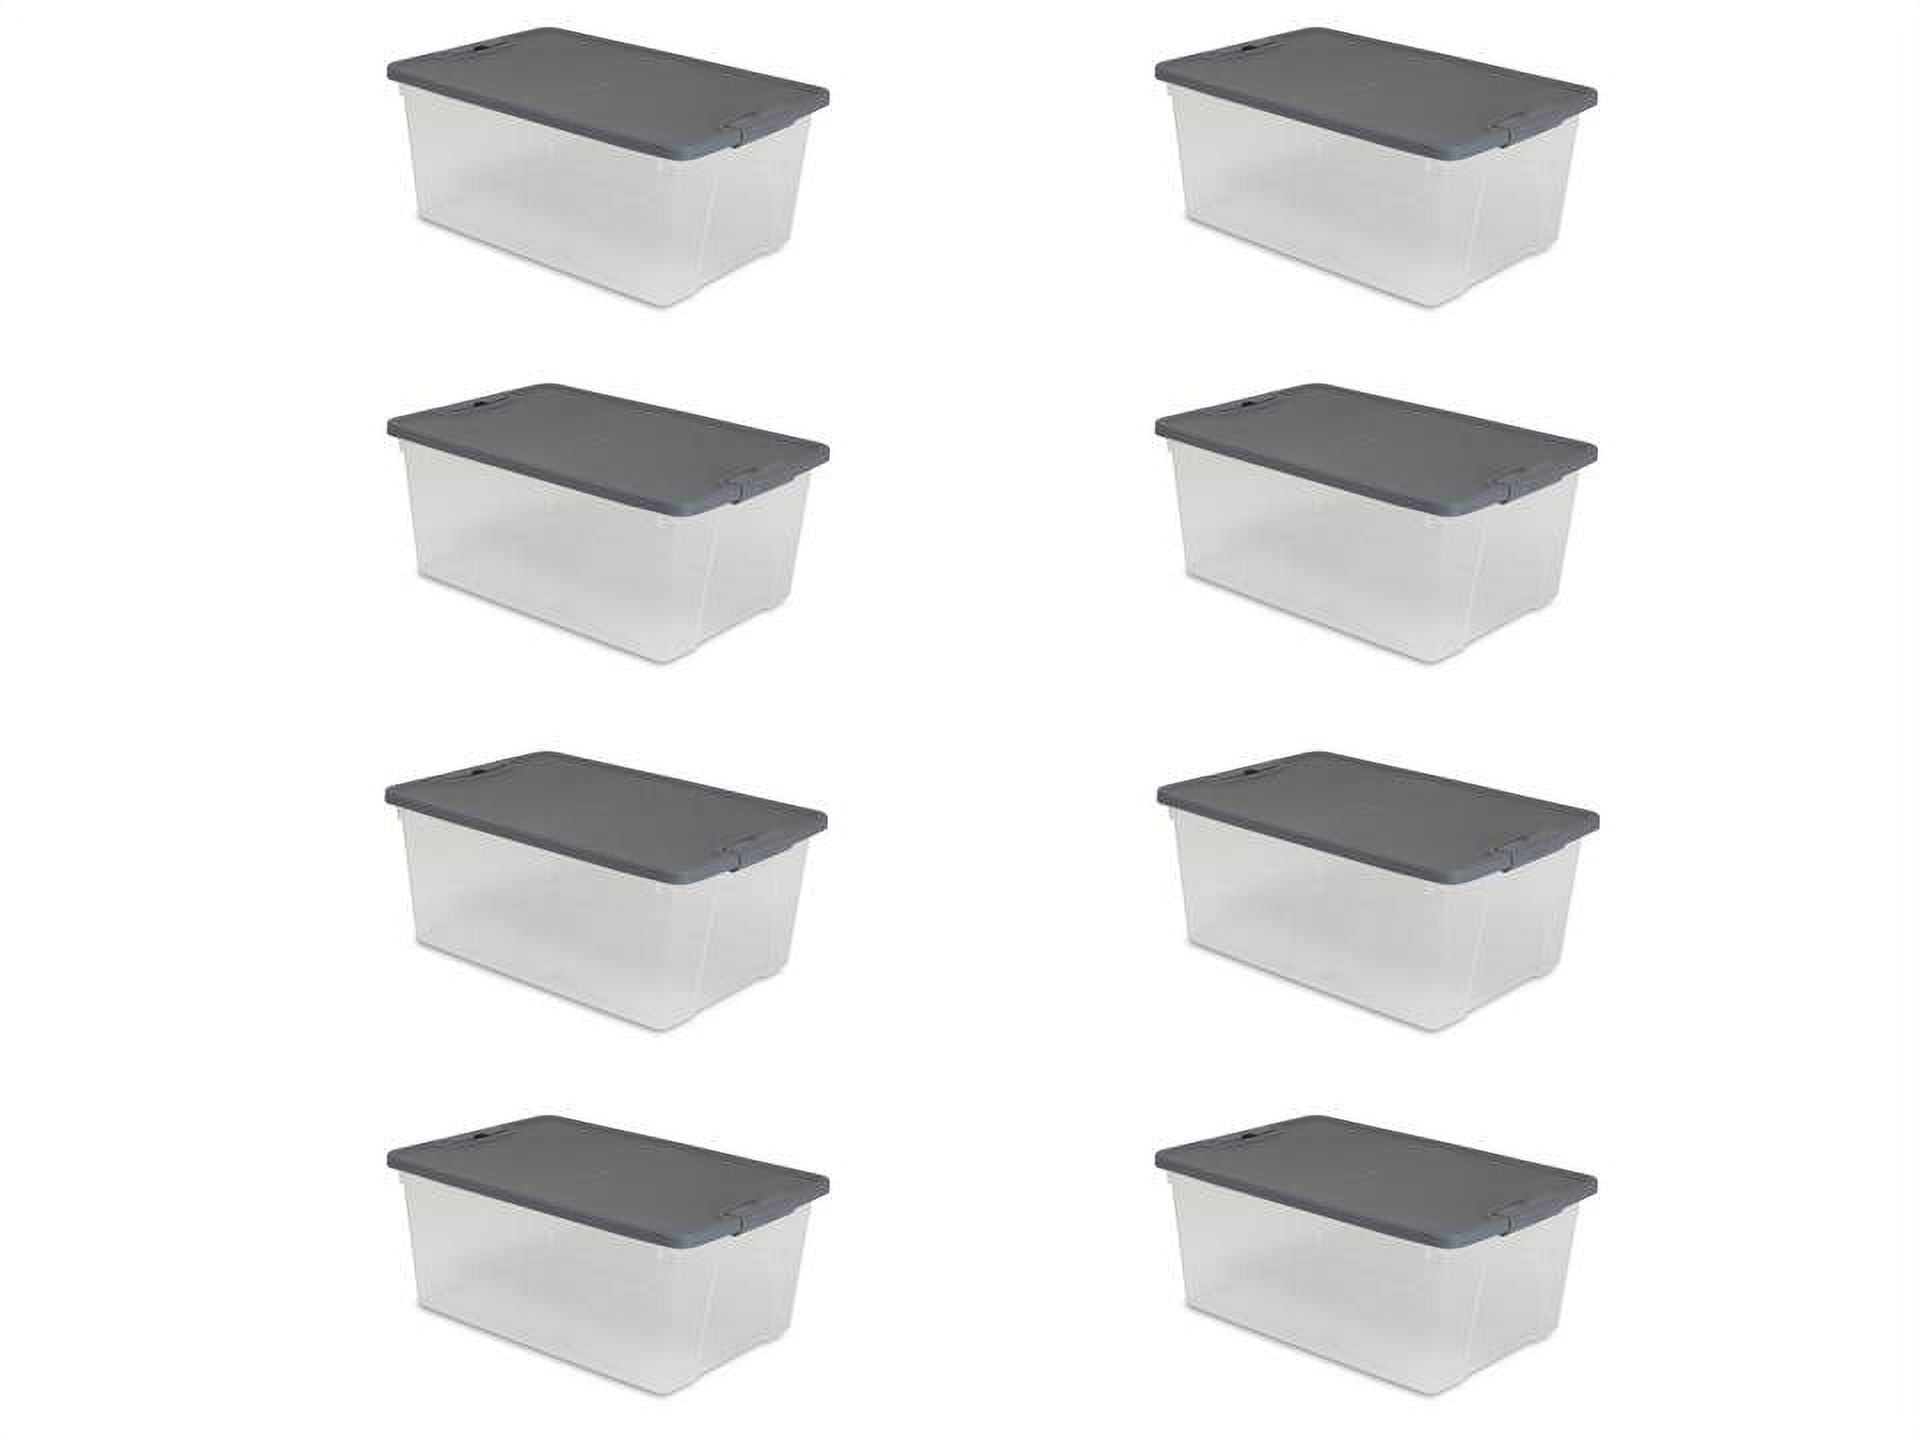 RW Base Gray Plastic Collapsible Storage Container - 21 x 15 1/2